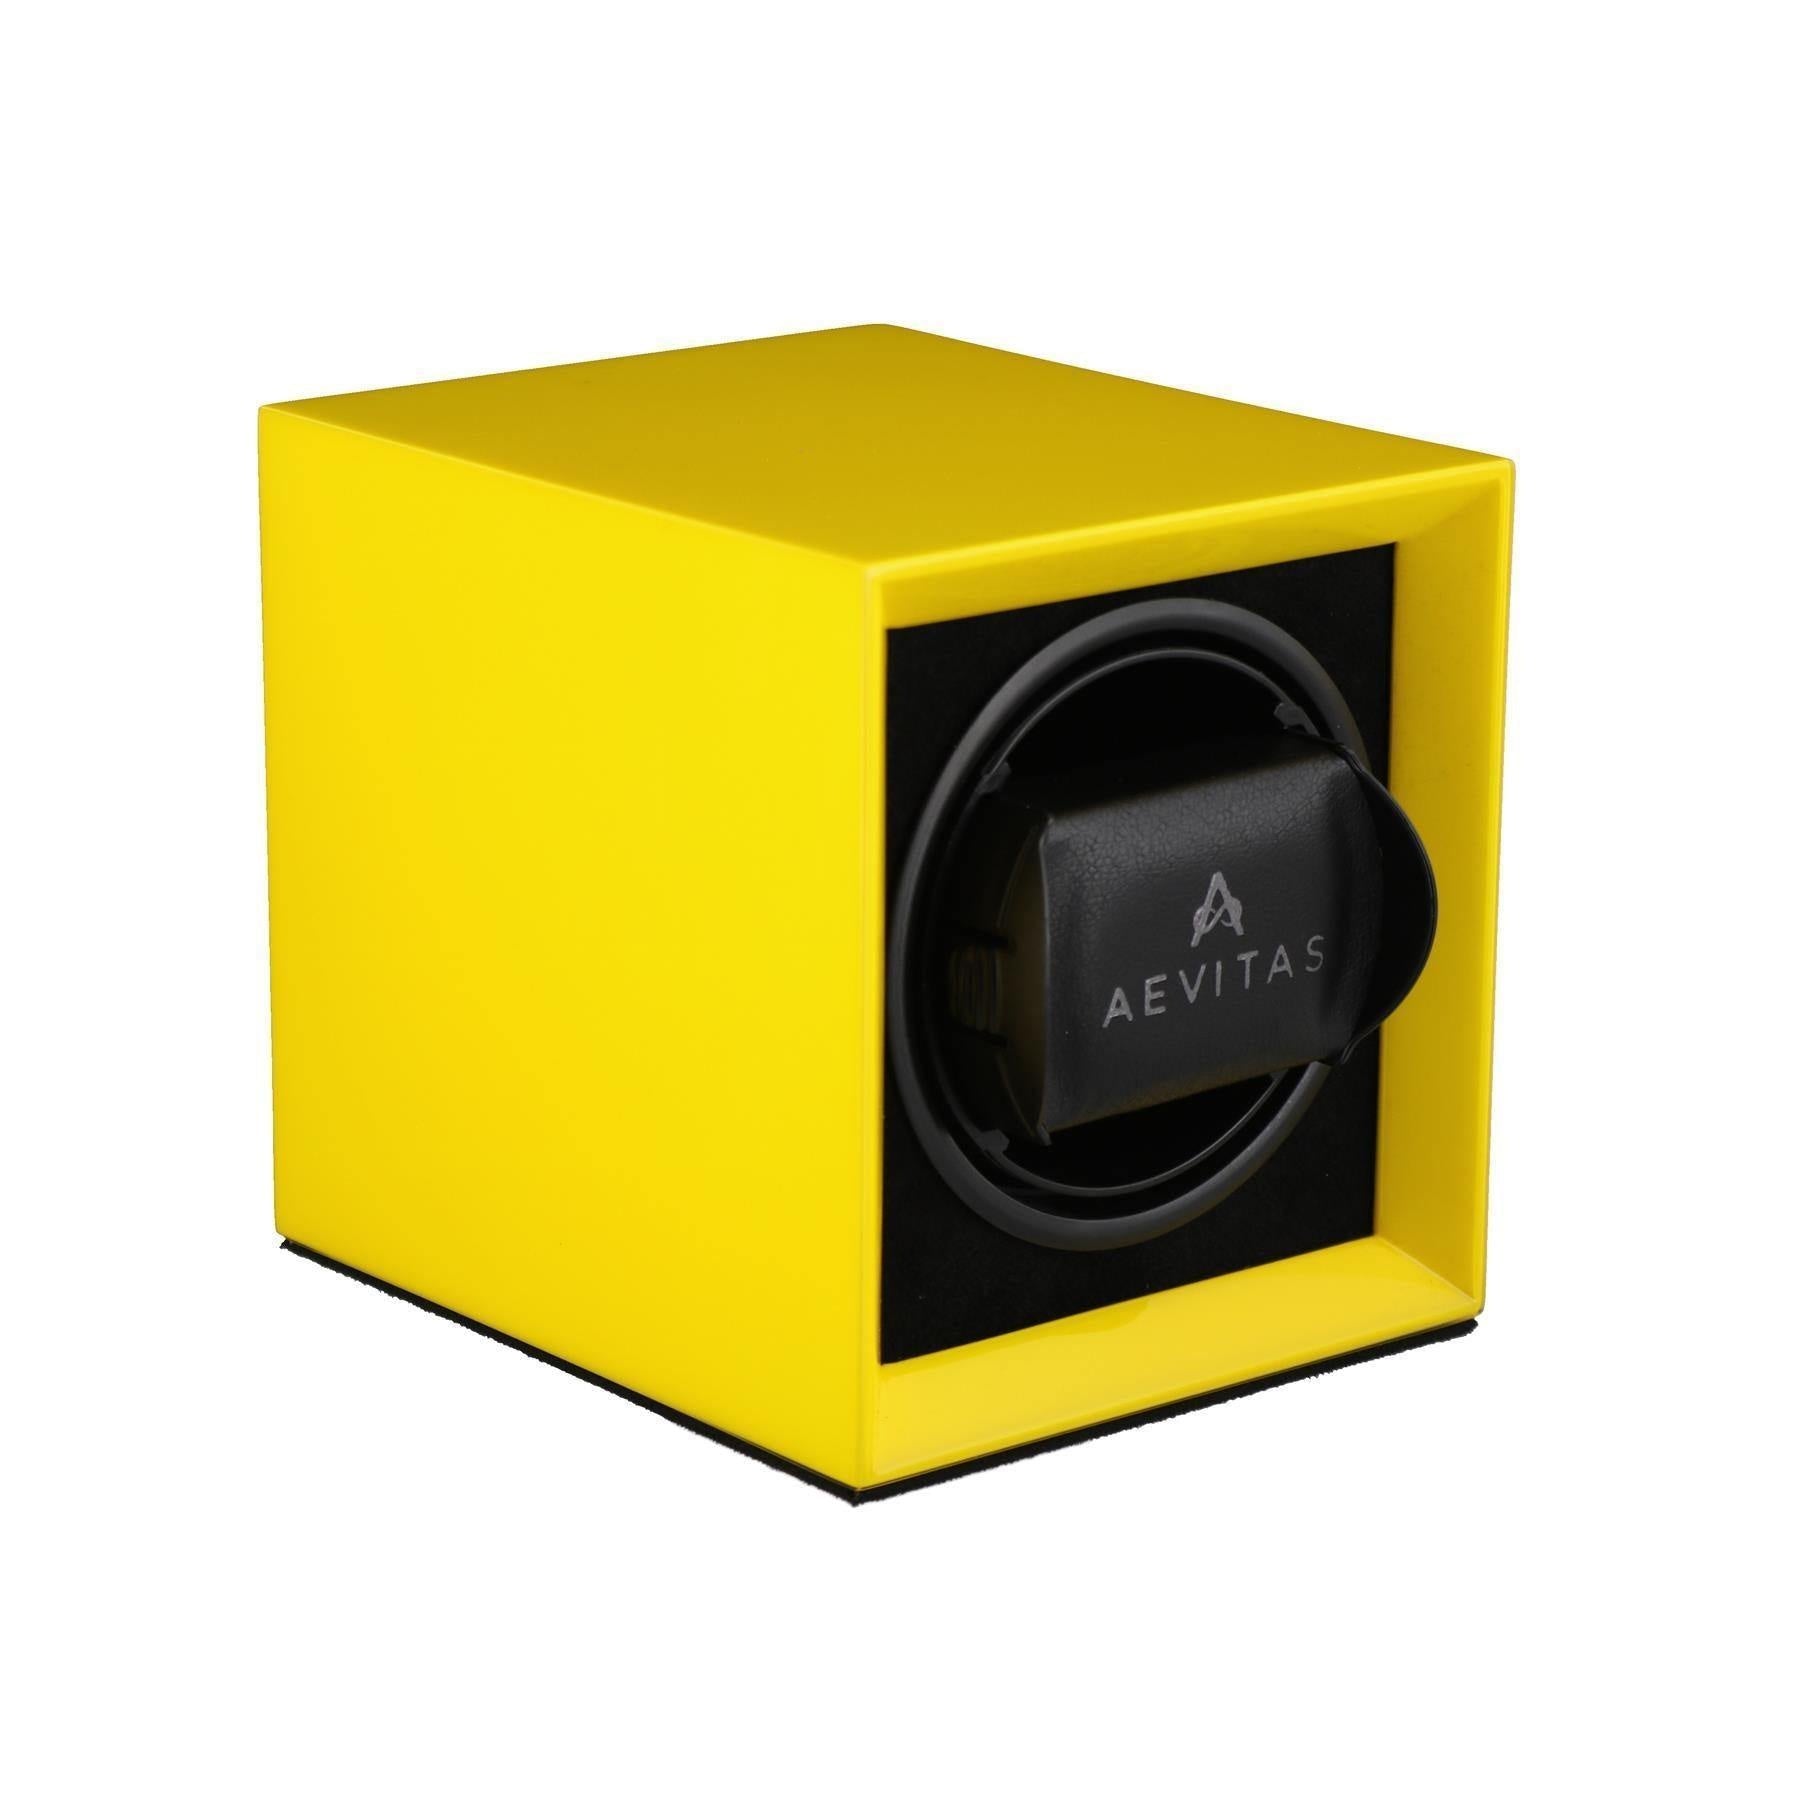 Watch Winder for 1 Automatic Watch in Yellow Mains or Battery by Aevitas